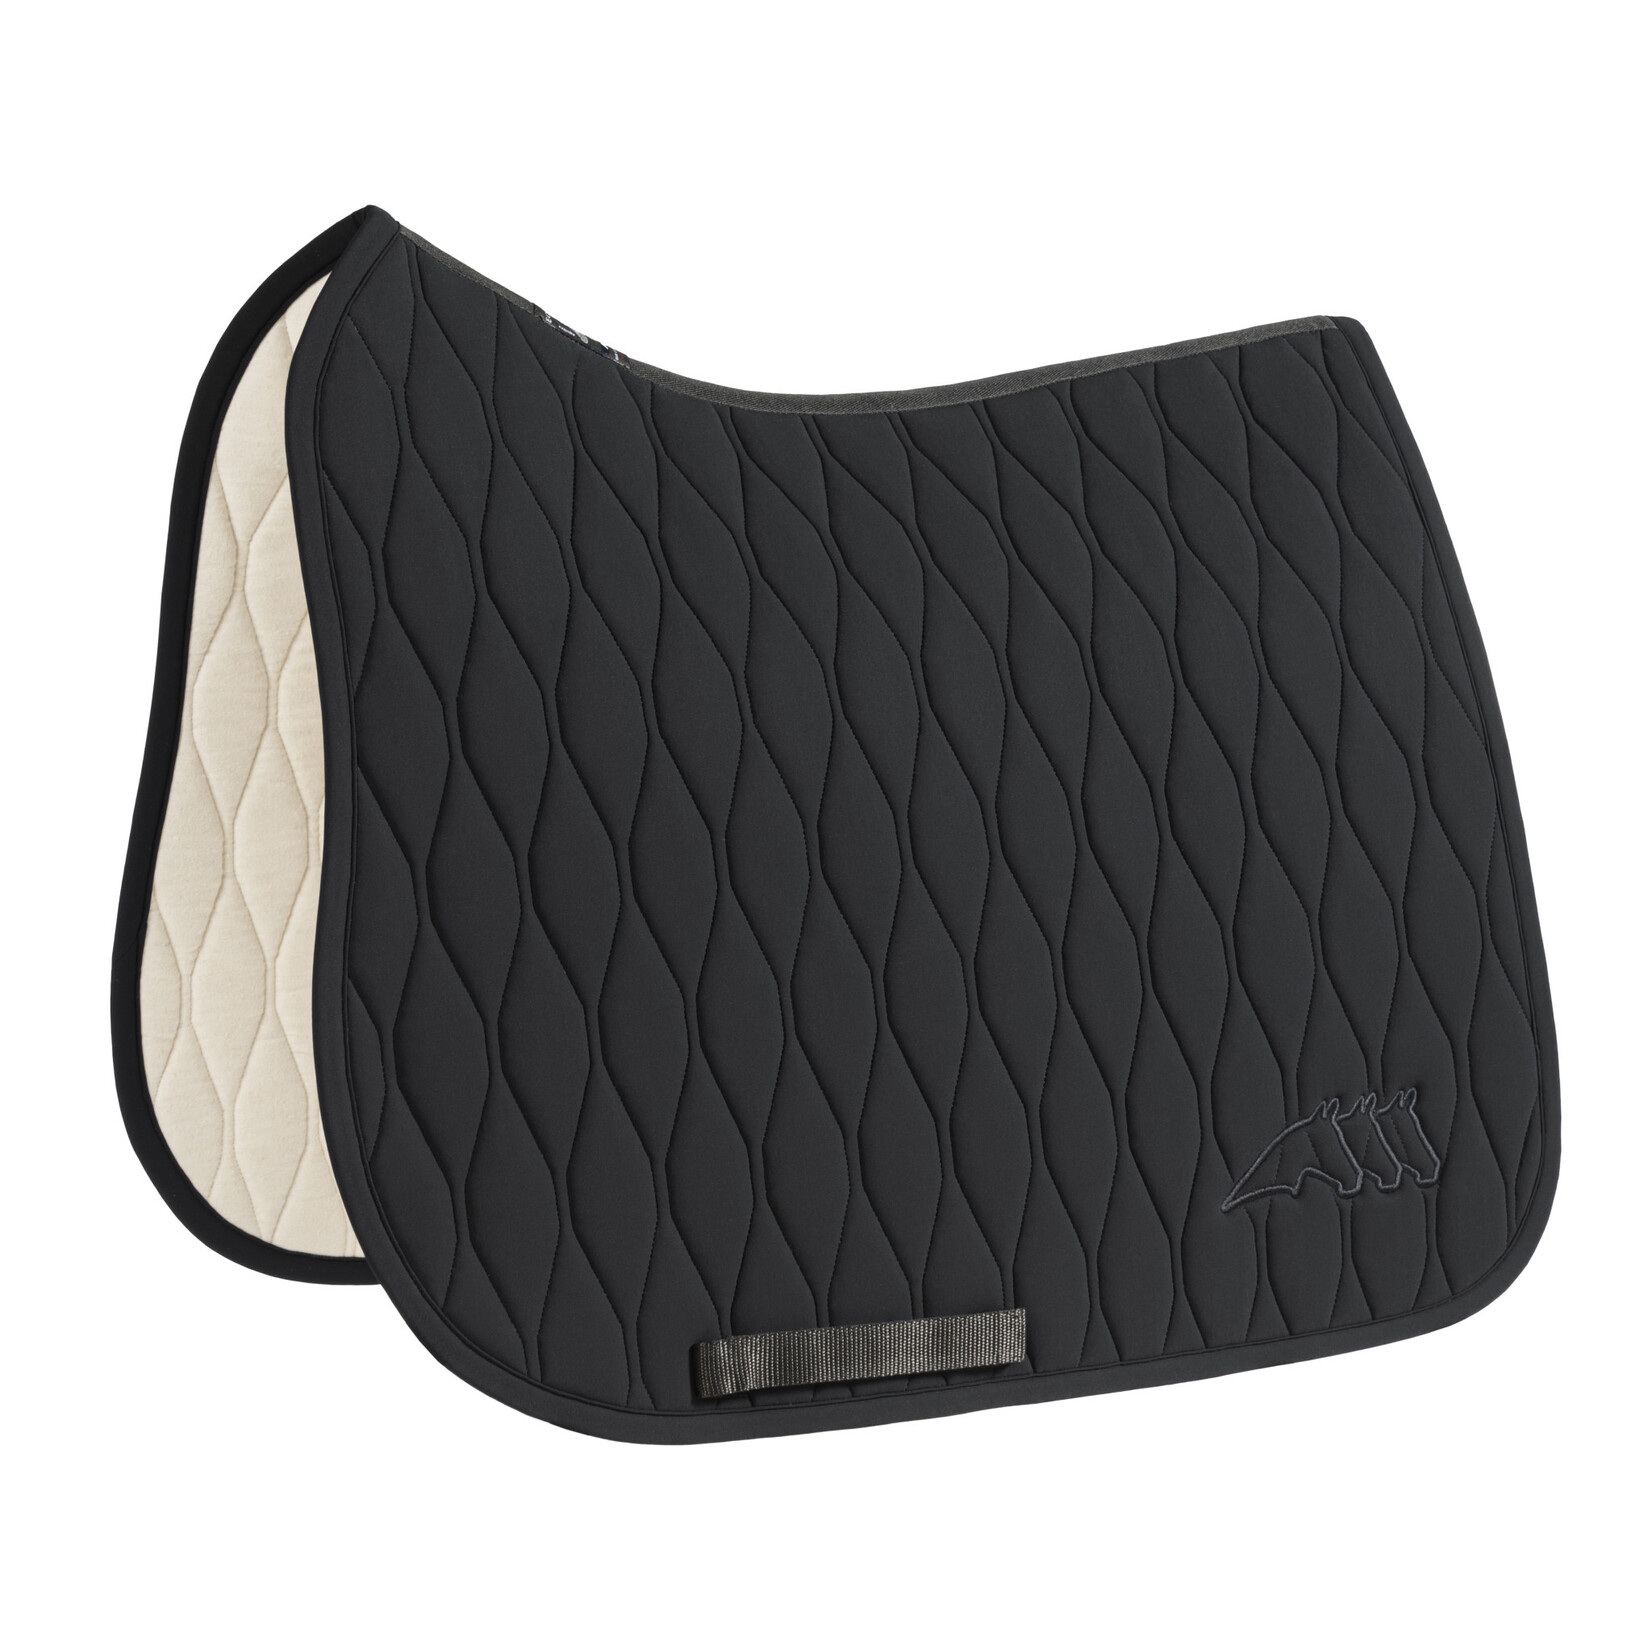 Equiline B11285 Equiline Emabe Tech Saddle Pad